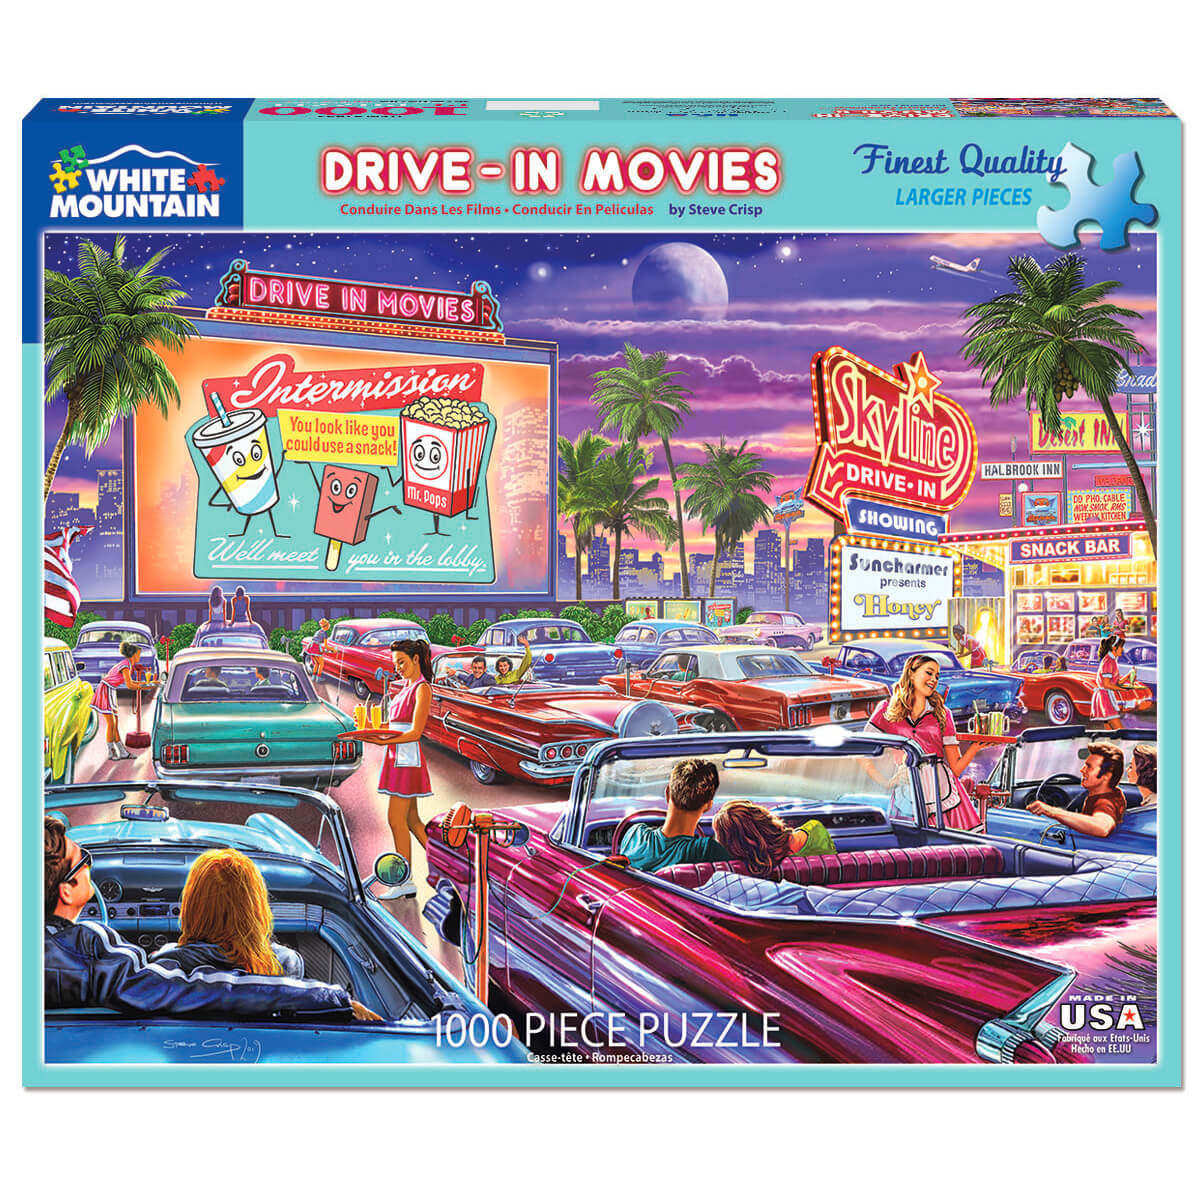 White Mountain Puzzles Drive-In Movie 1000 Piece Jigsaw Puzzle